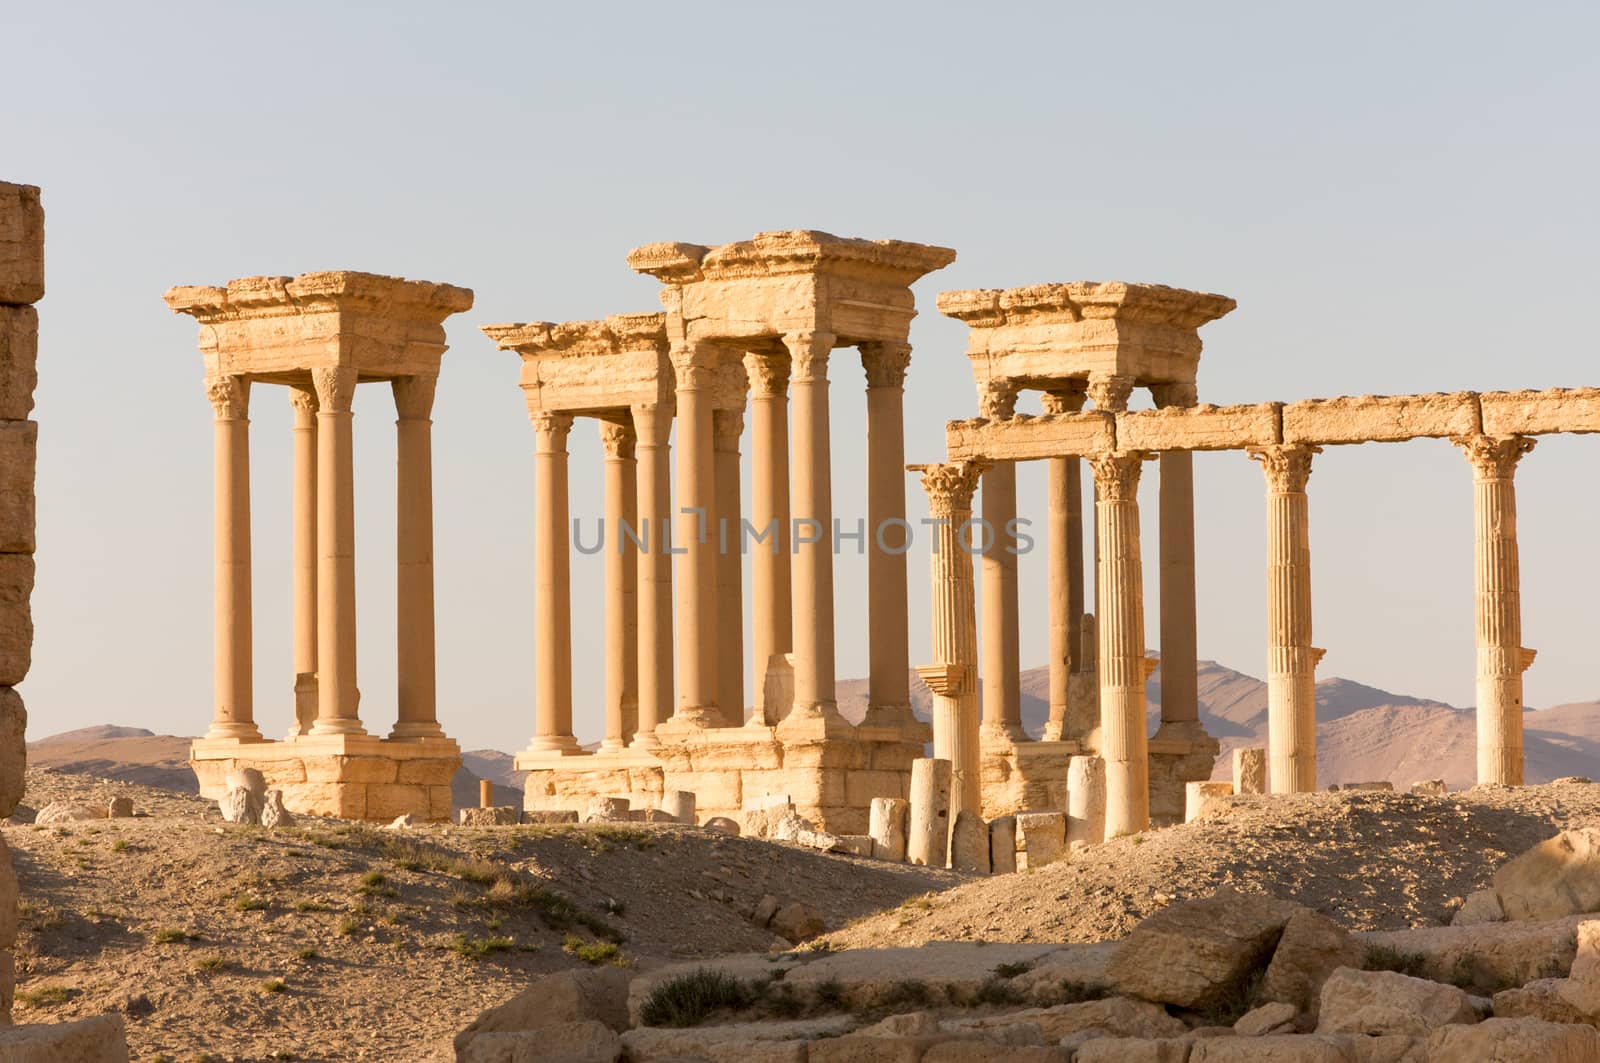 Palmyre Syria 2009 This ancient site has many Roman ruins, these standing columns shot in late afternoon sun are Tetrapylon, a set of four monuments with four columns each at the center of the colonnaded road leading to a Roman-era amphitheater . High quality photo